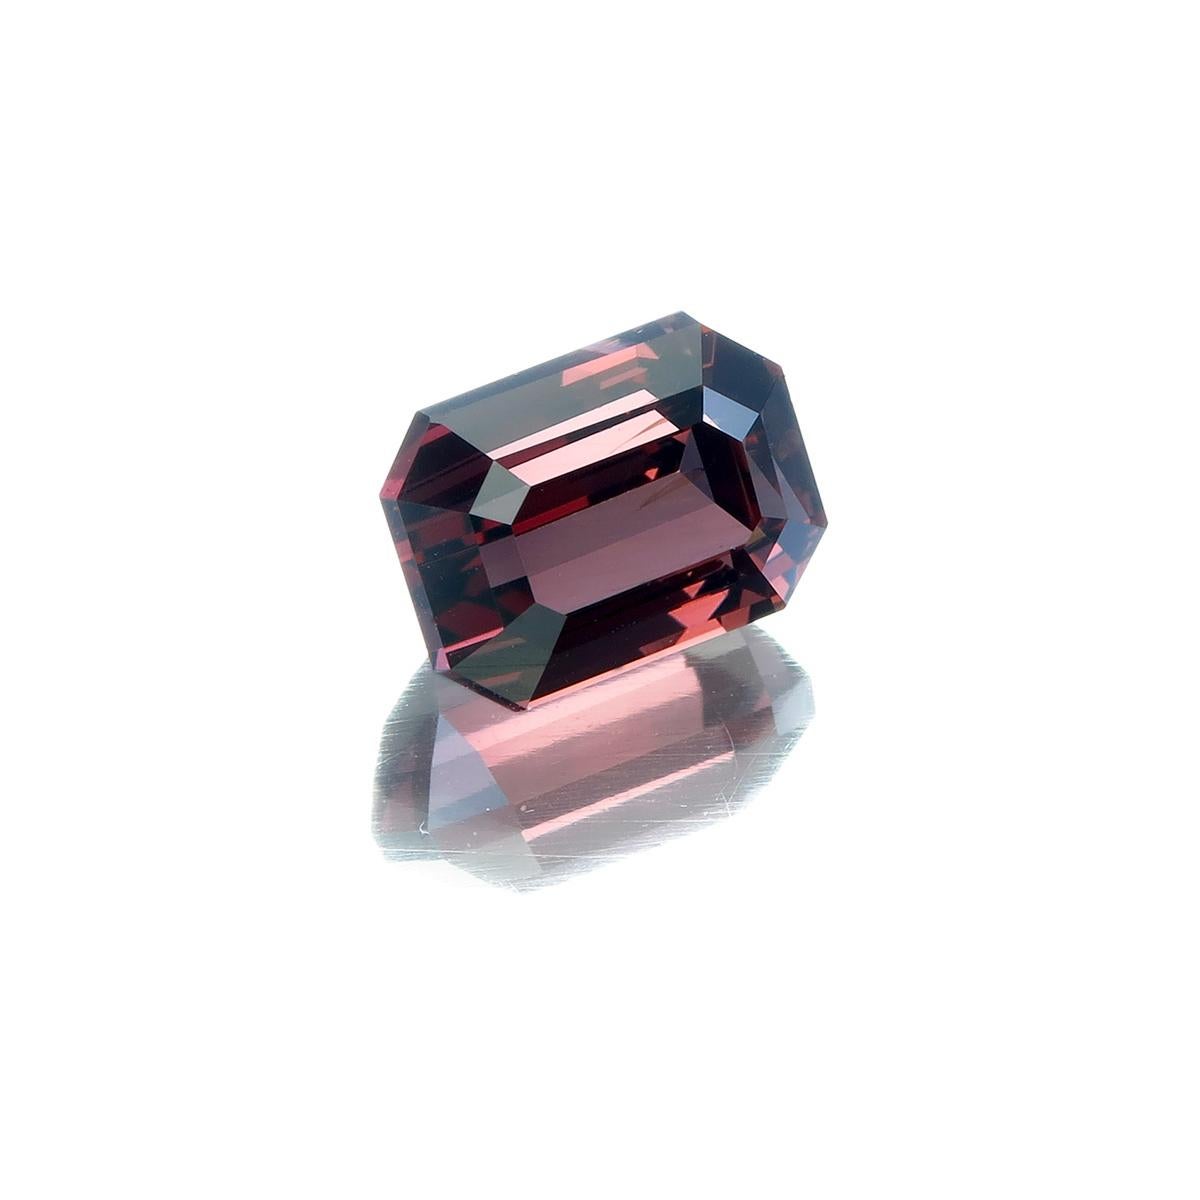 An exquisite and unique natural red spinel has a gorgeous rich red color. The stone is ideal in cut quality as it has crisp faceting and amazing light return. The color and sparkle combination here is incredible. The spinel is certified by Lotus one